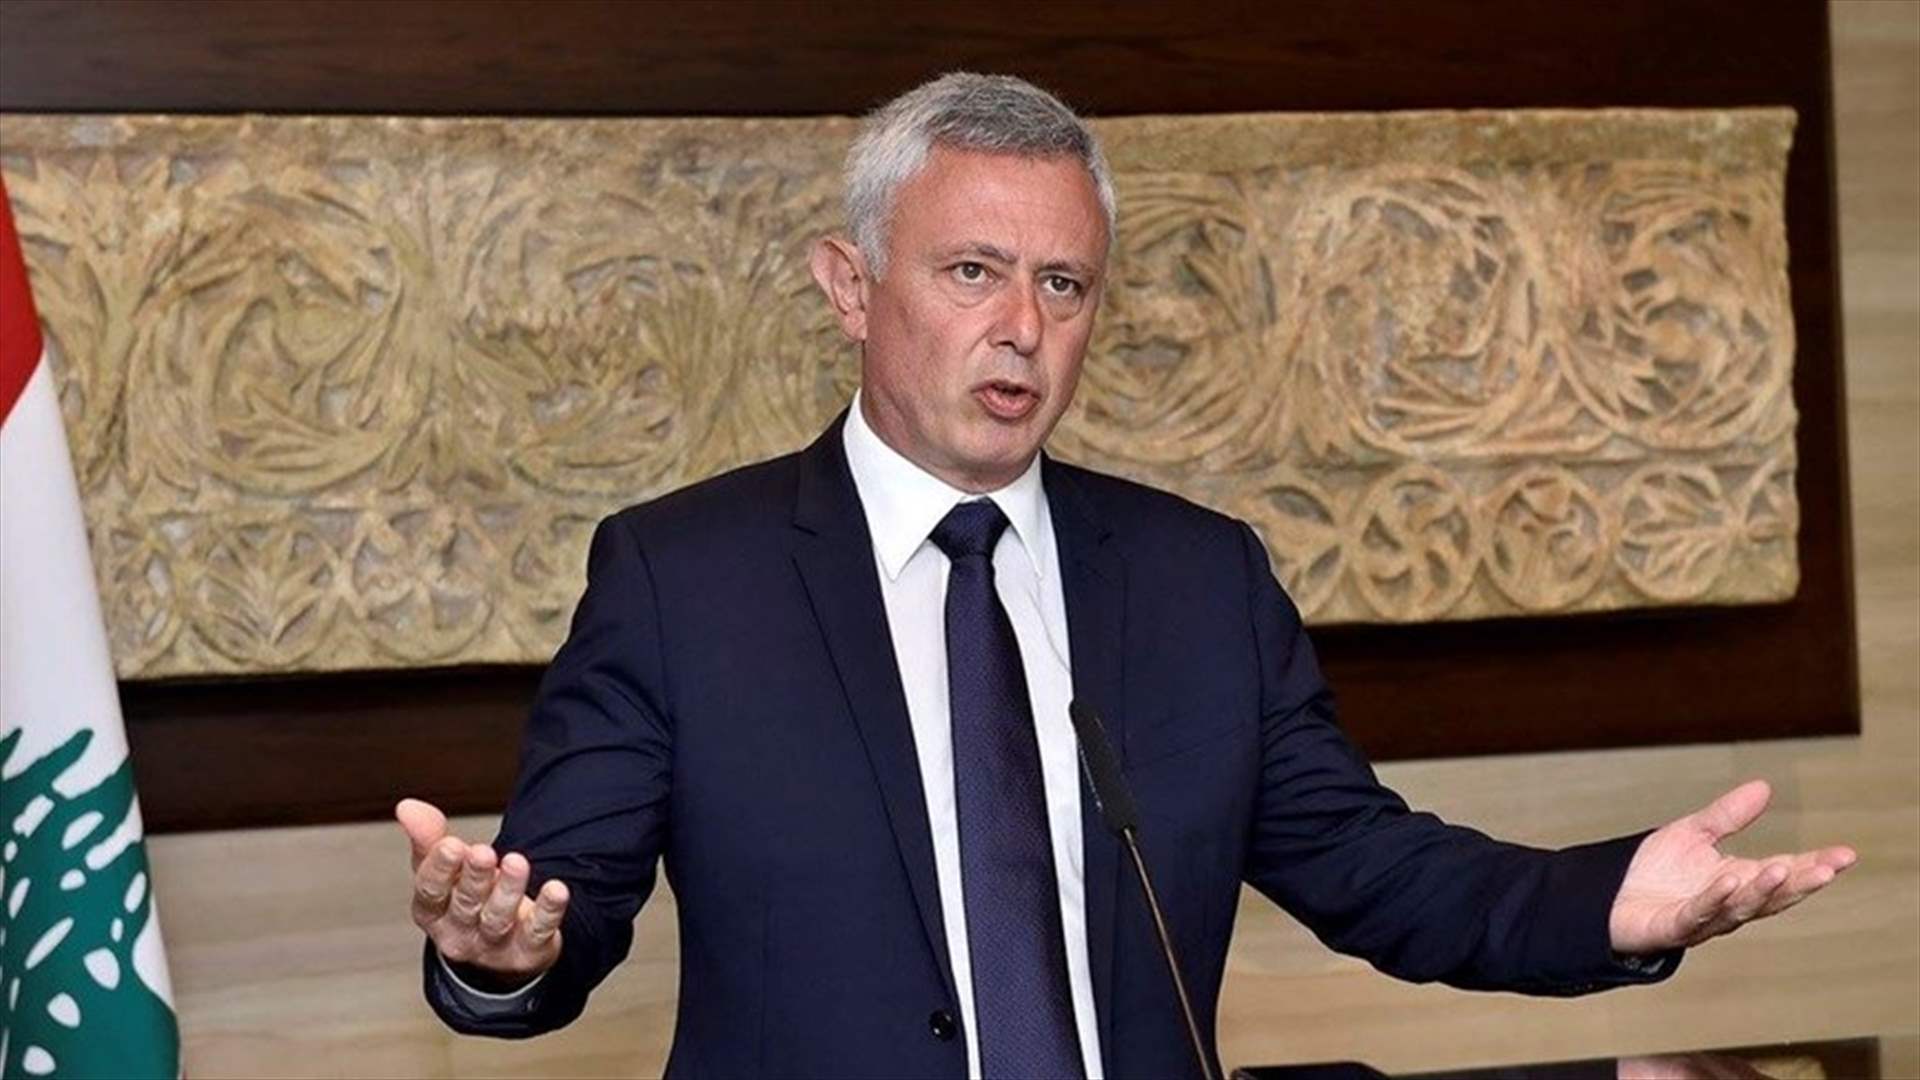 Does Frangieh meet the presidential criteria according to France?